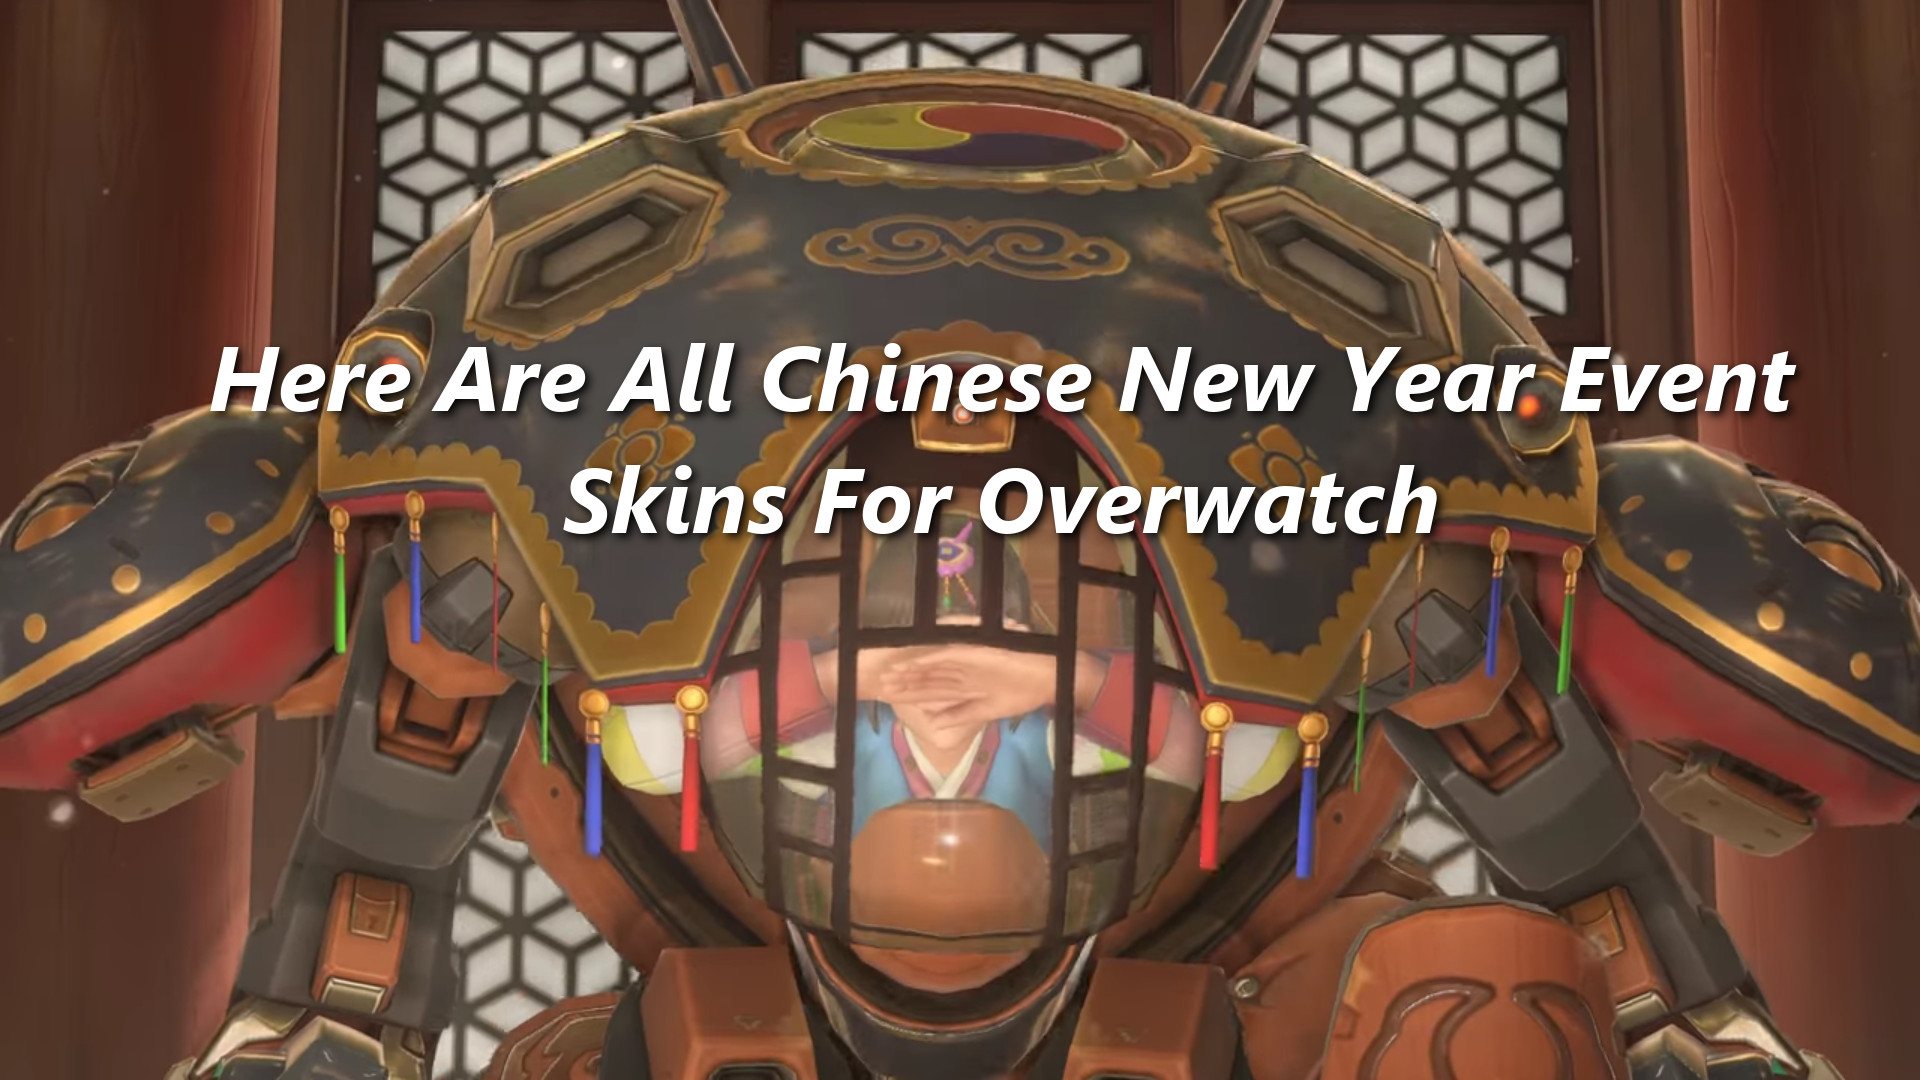 Here Are All Chinese New Year Event Skins For Overwatch